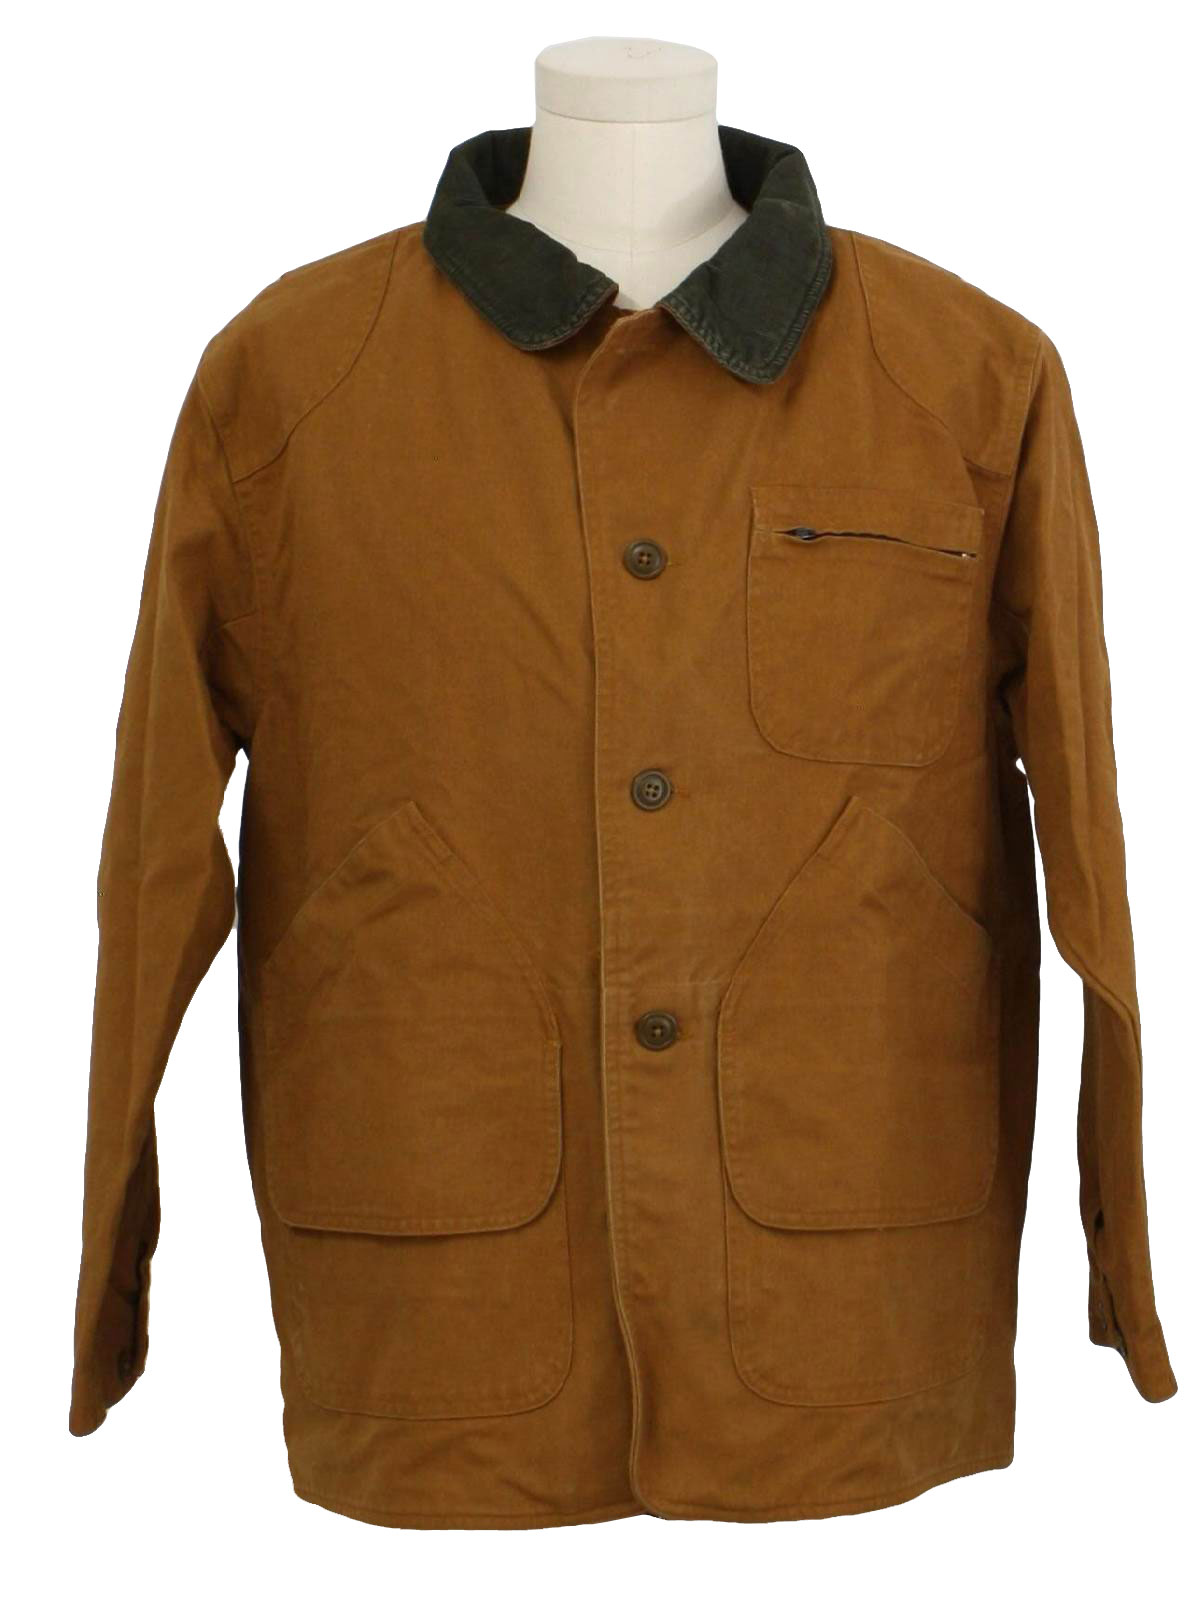 Retro Eighties Jacket: 80s -L.L.Bean- Mens tan and olive cotton canvas ...